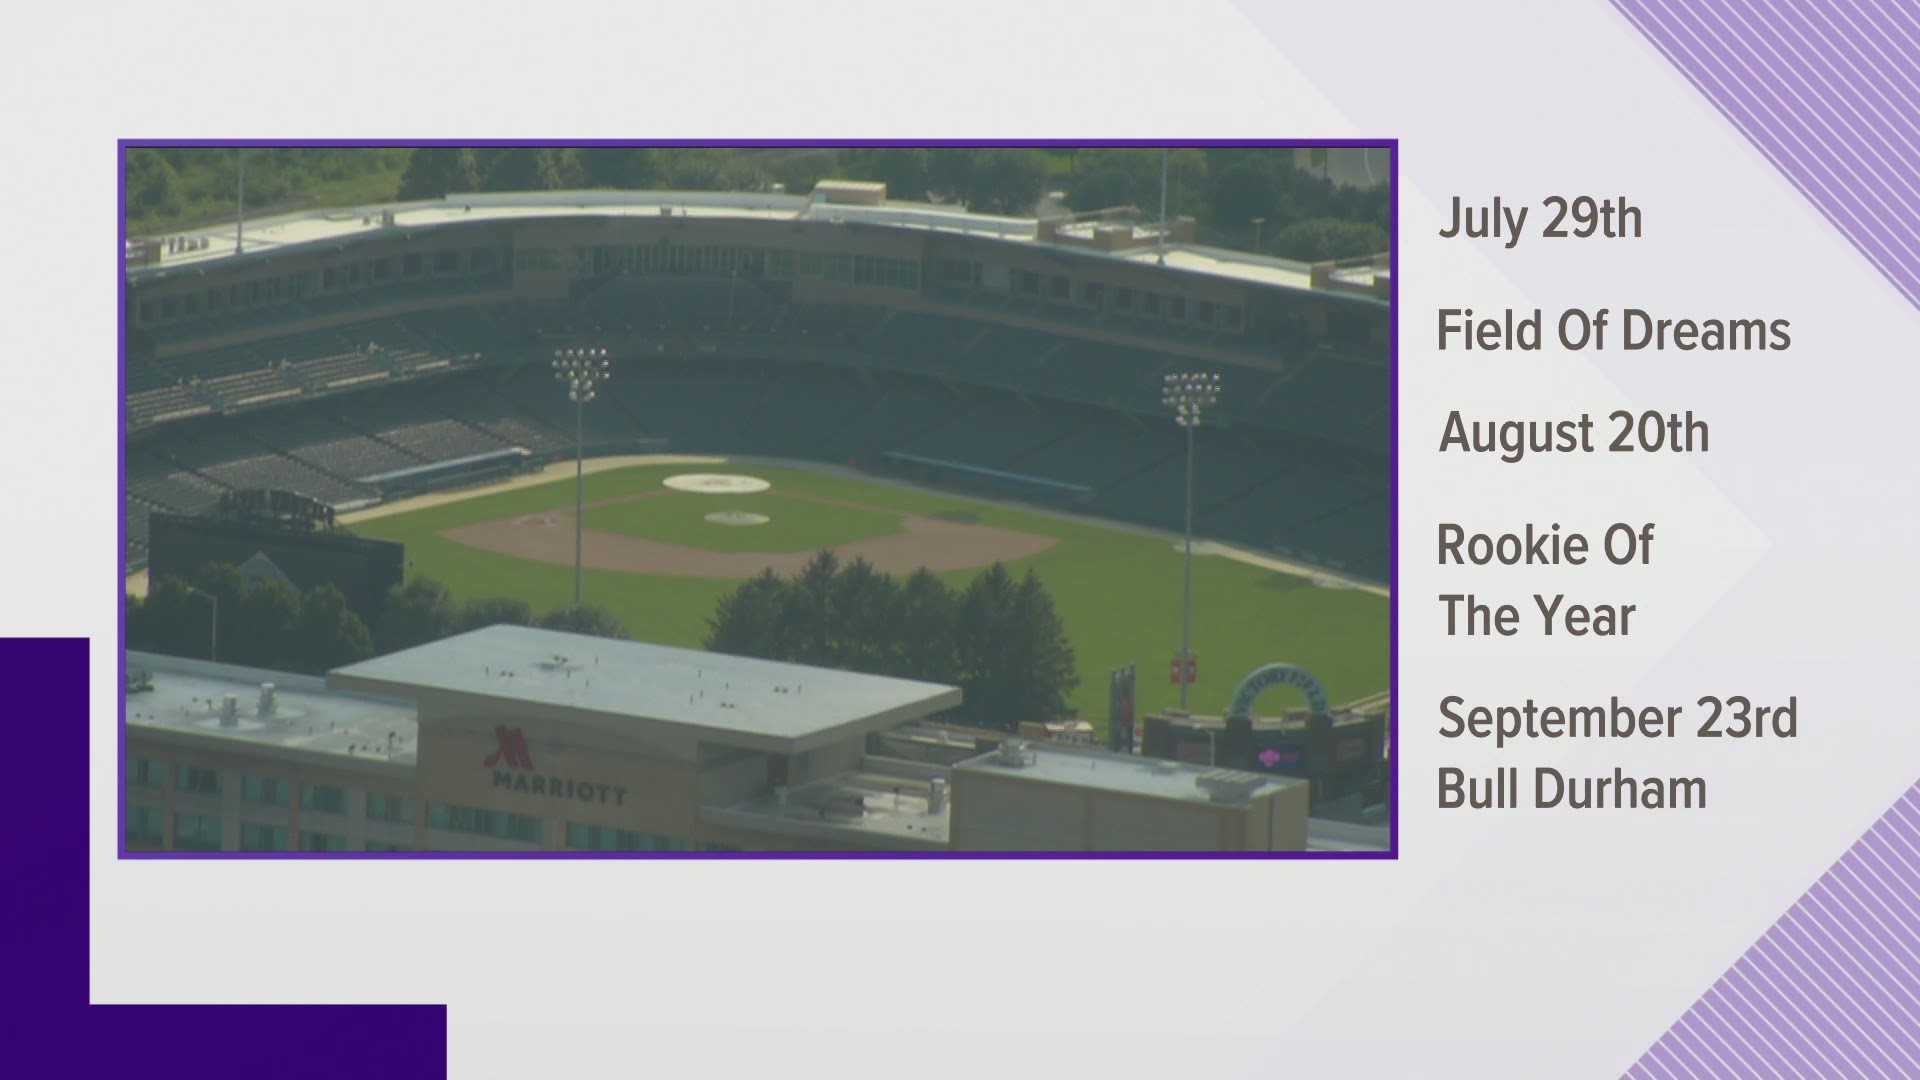 Field of Dreams, Bull Durham and Rookie of the Year are on the list.